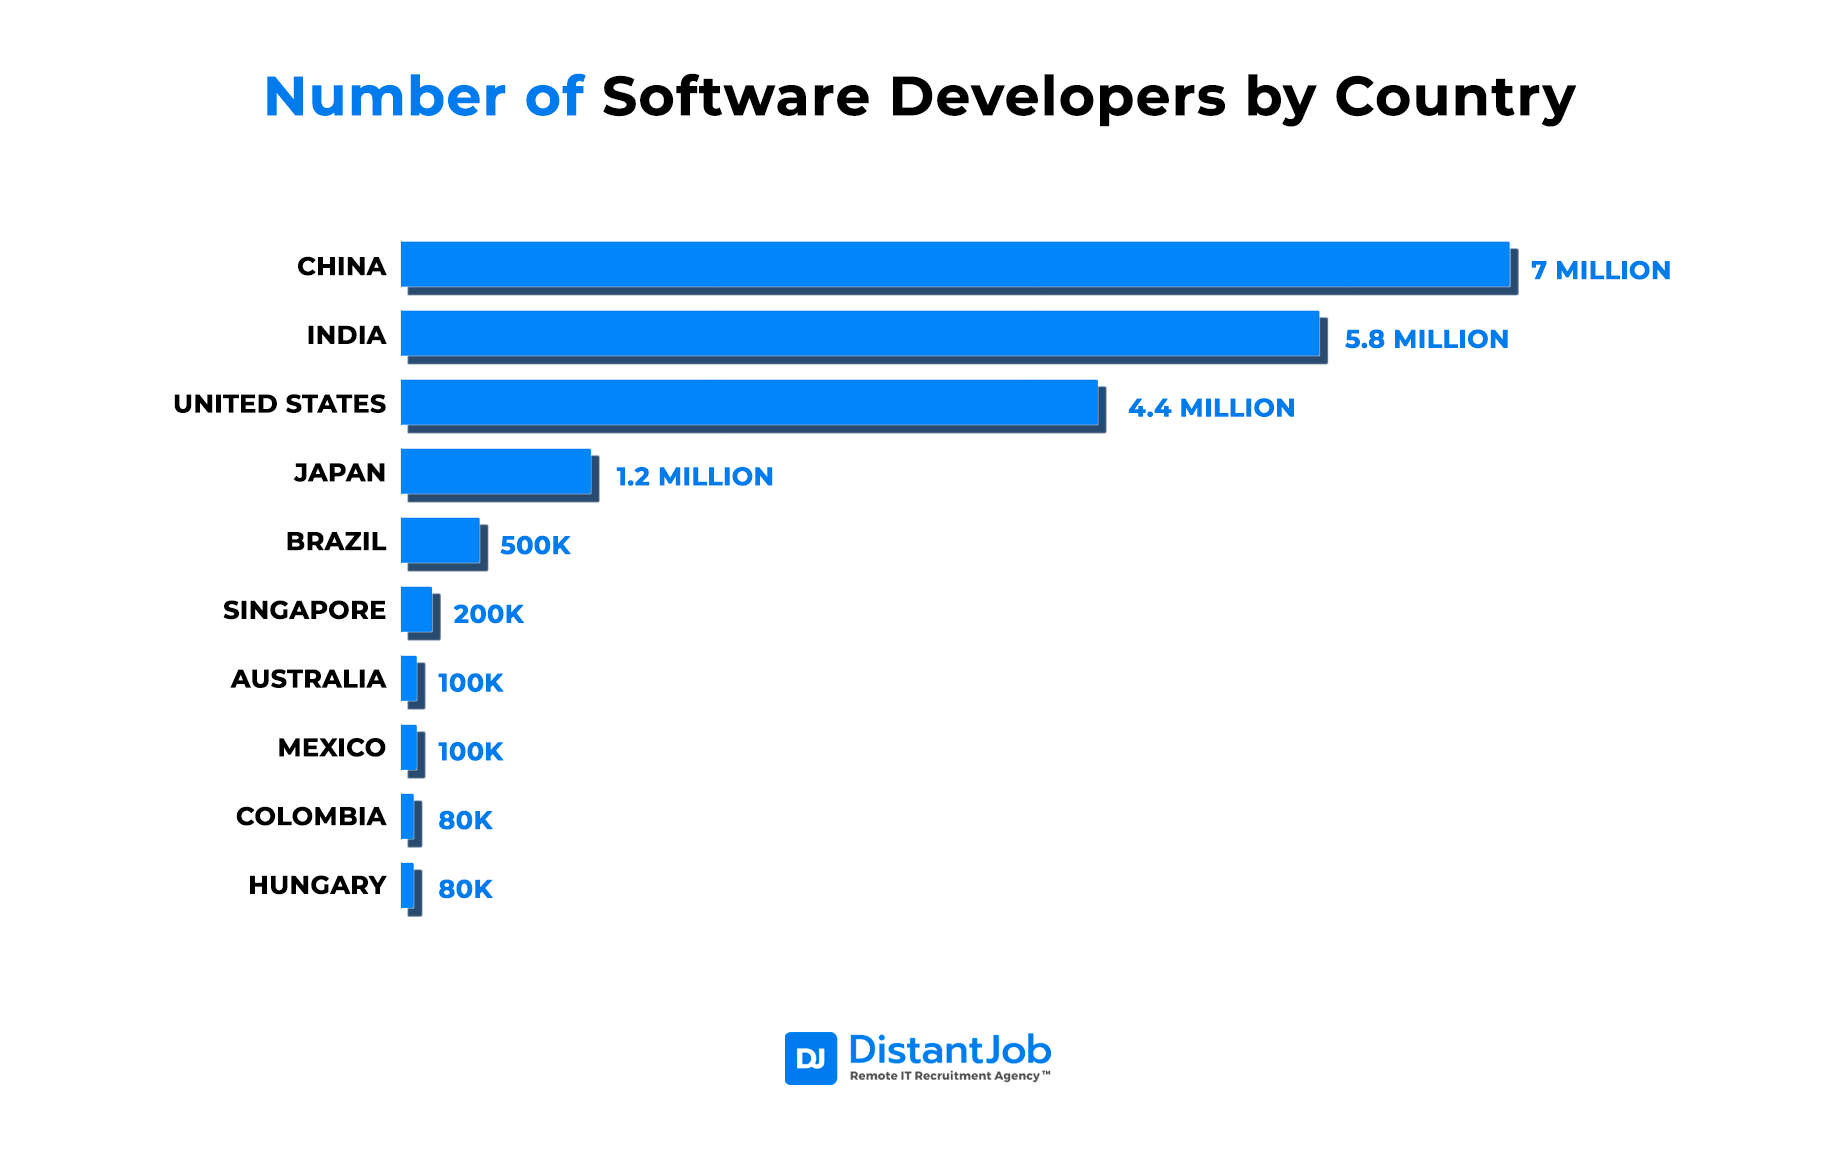 Number of software developers by country